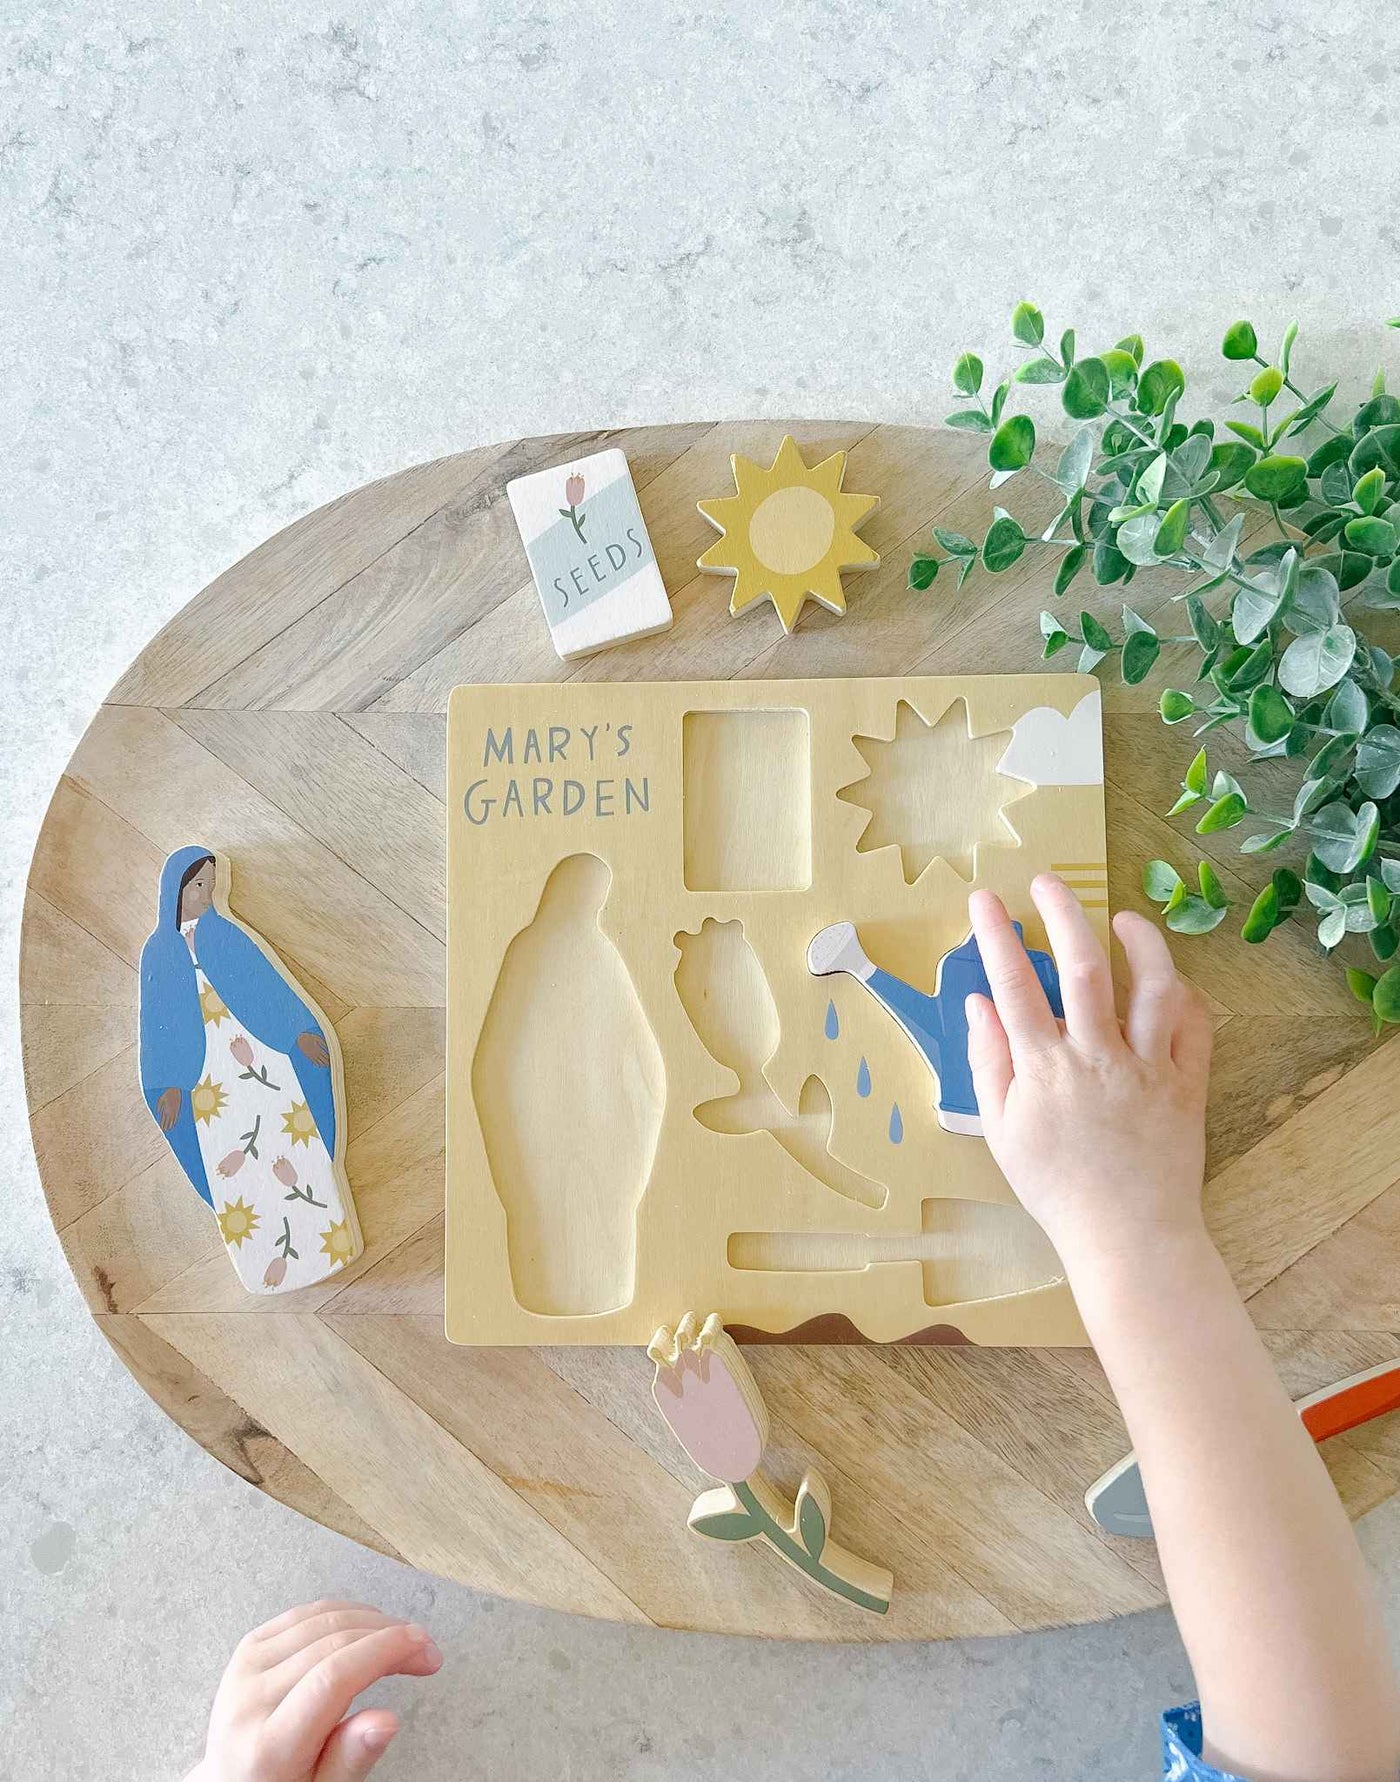 Mary's Garden Wooden Puzzle